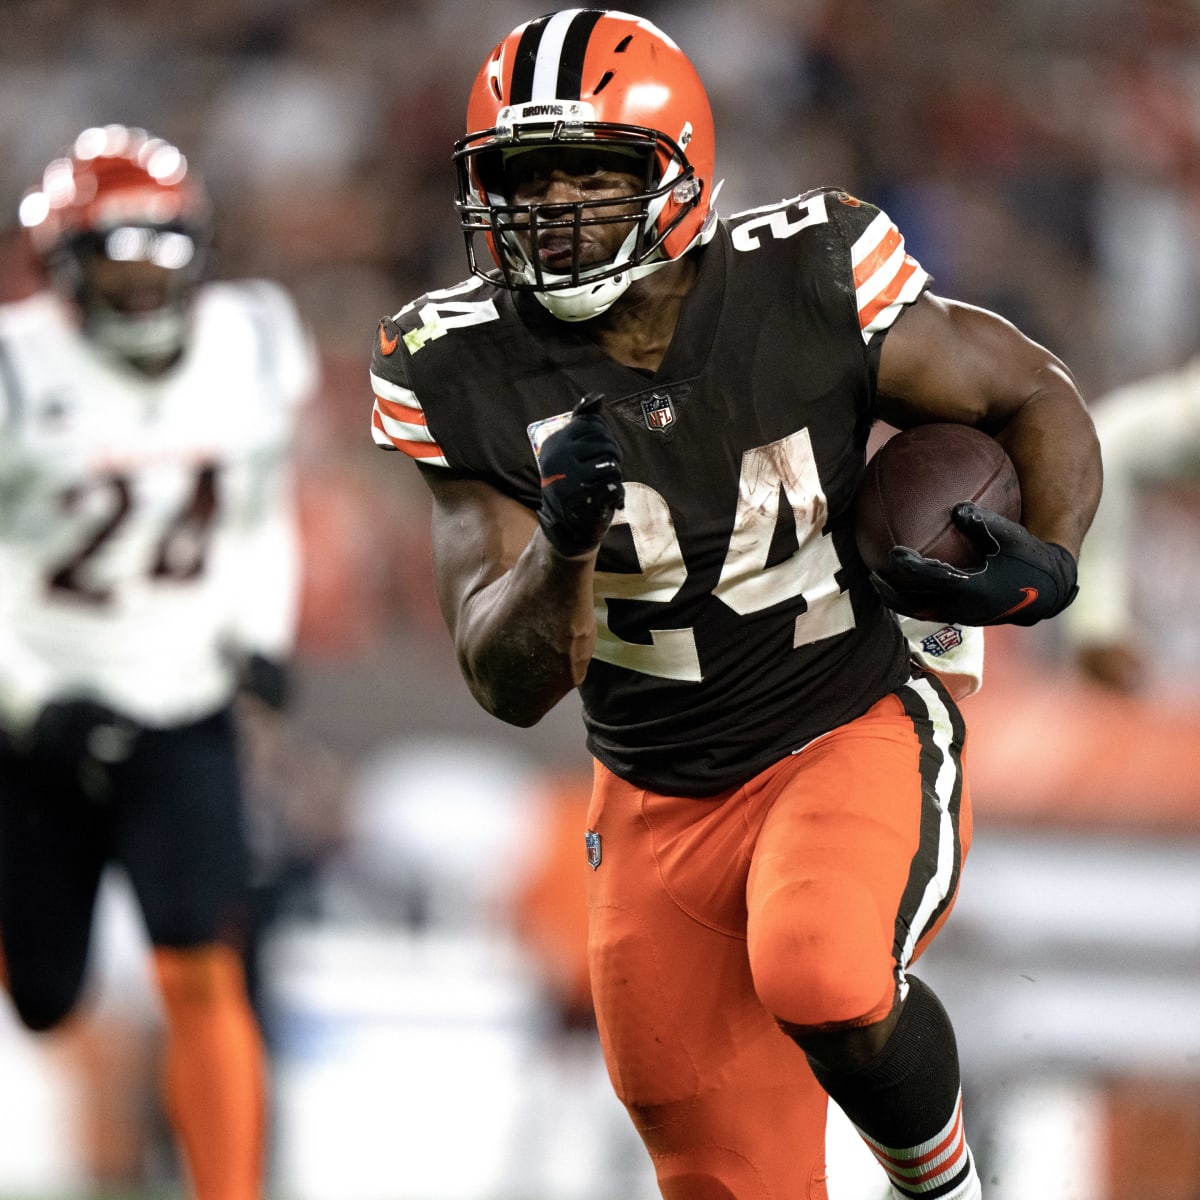 Nick Chubb is the best RB in the league according to PFF but will it last?